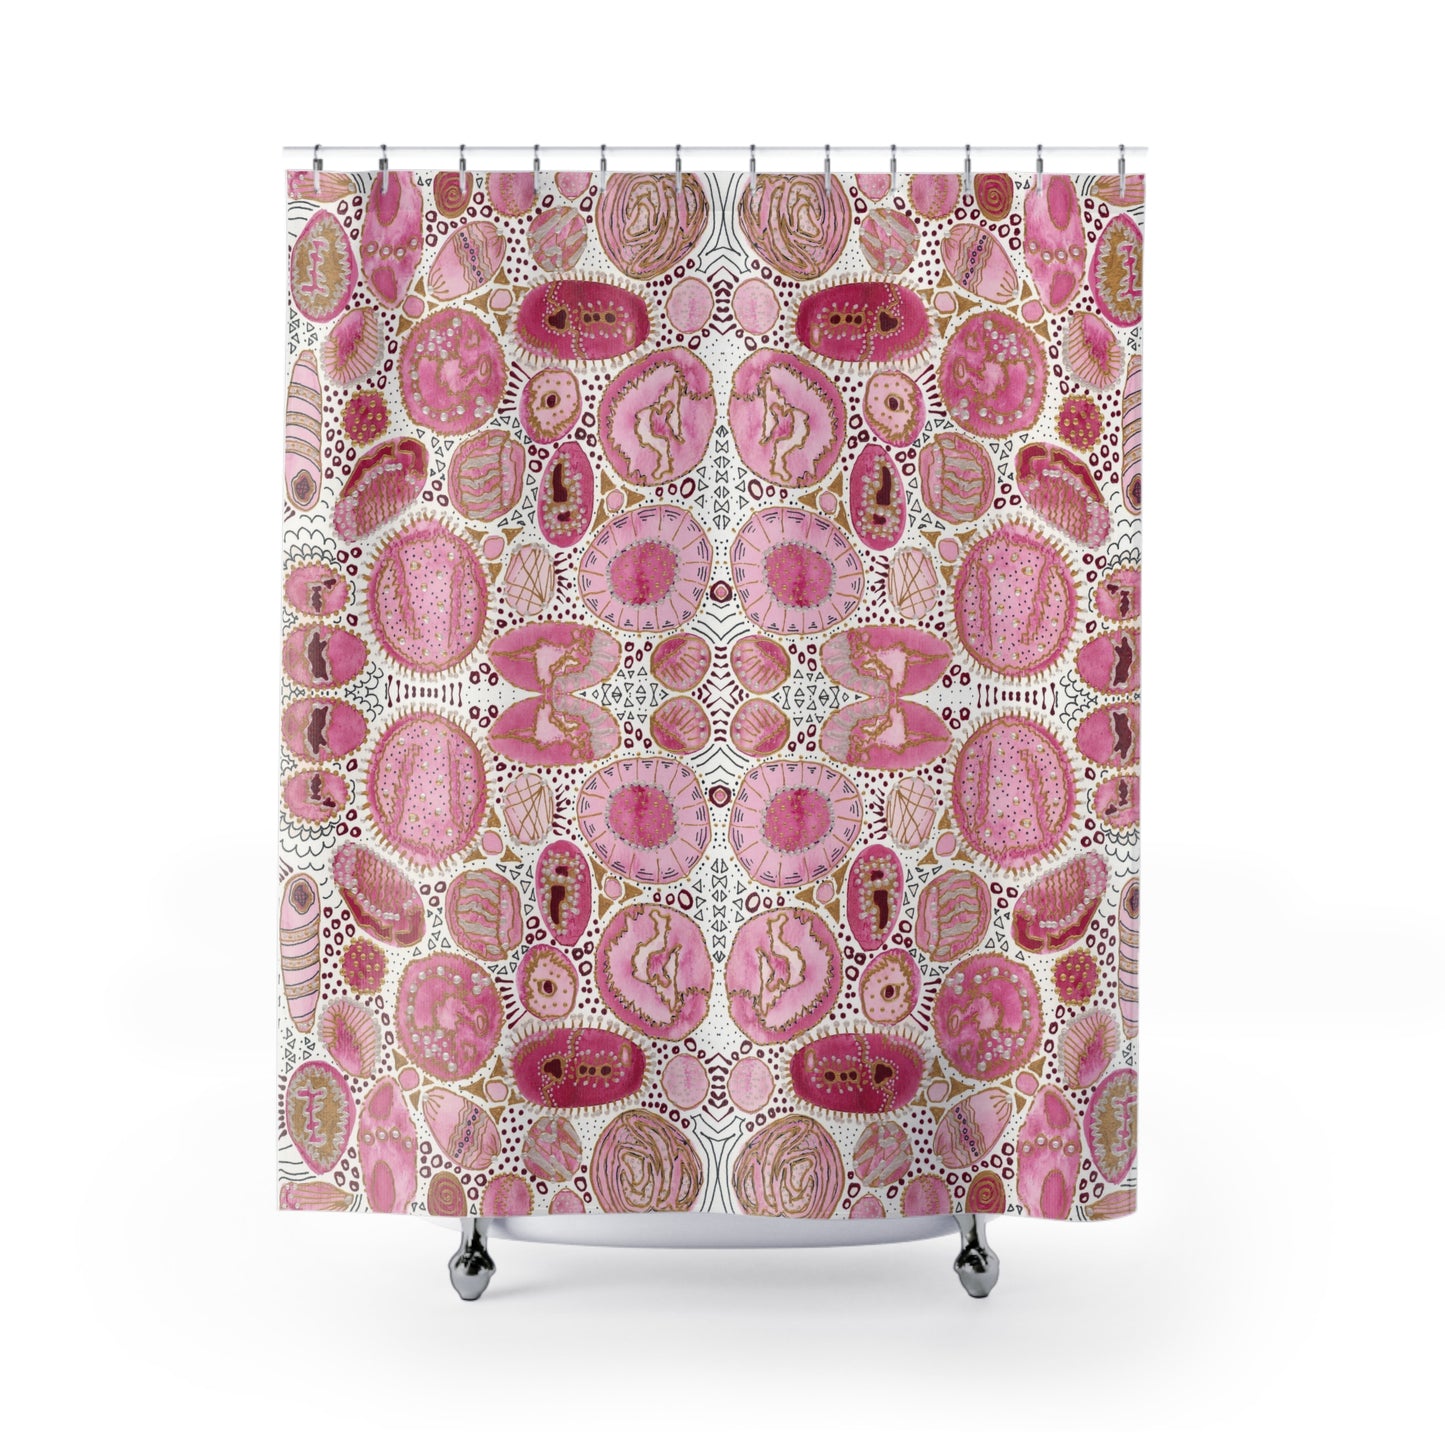 Shower Curtain -  Pink Bliss Bubbles